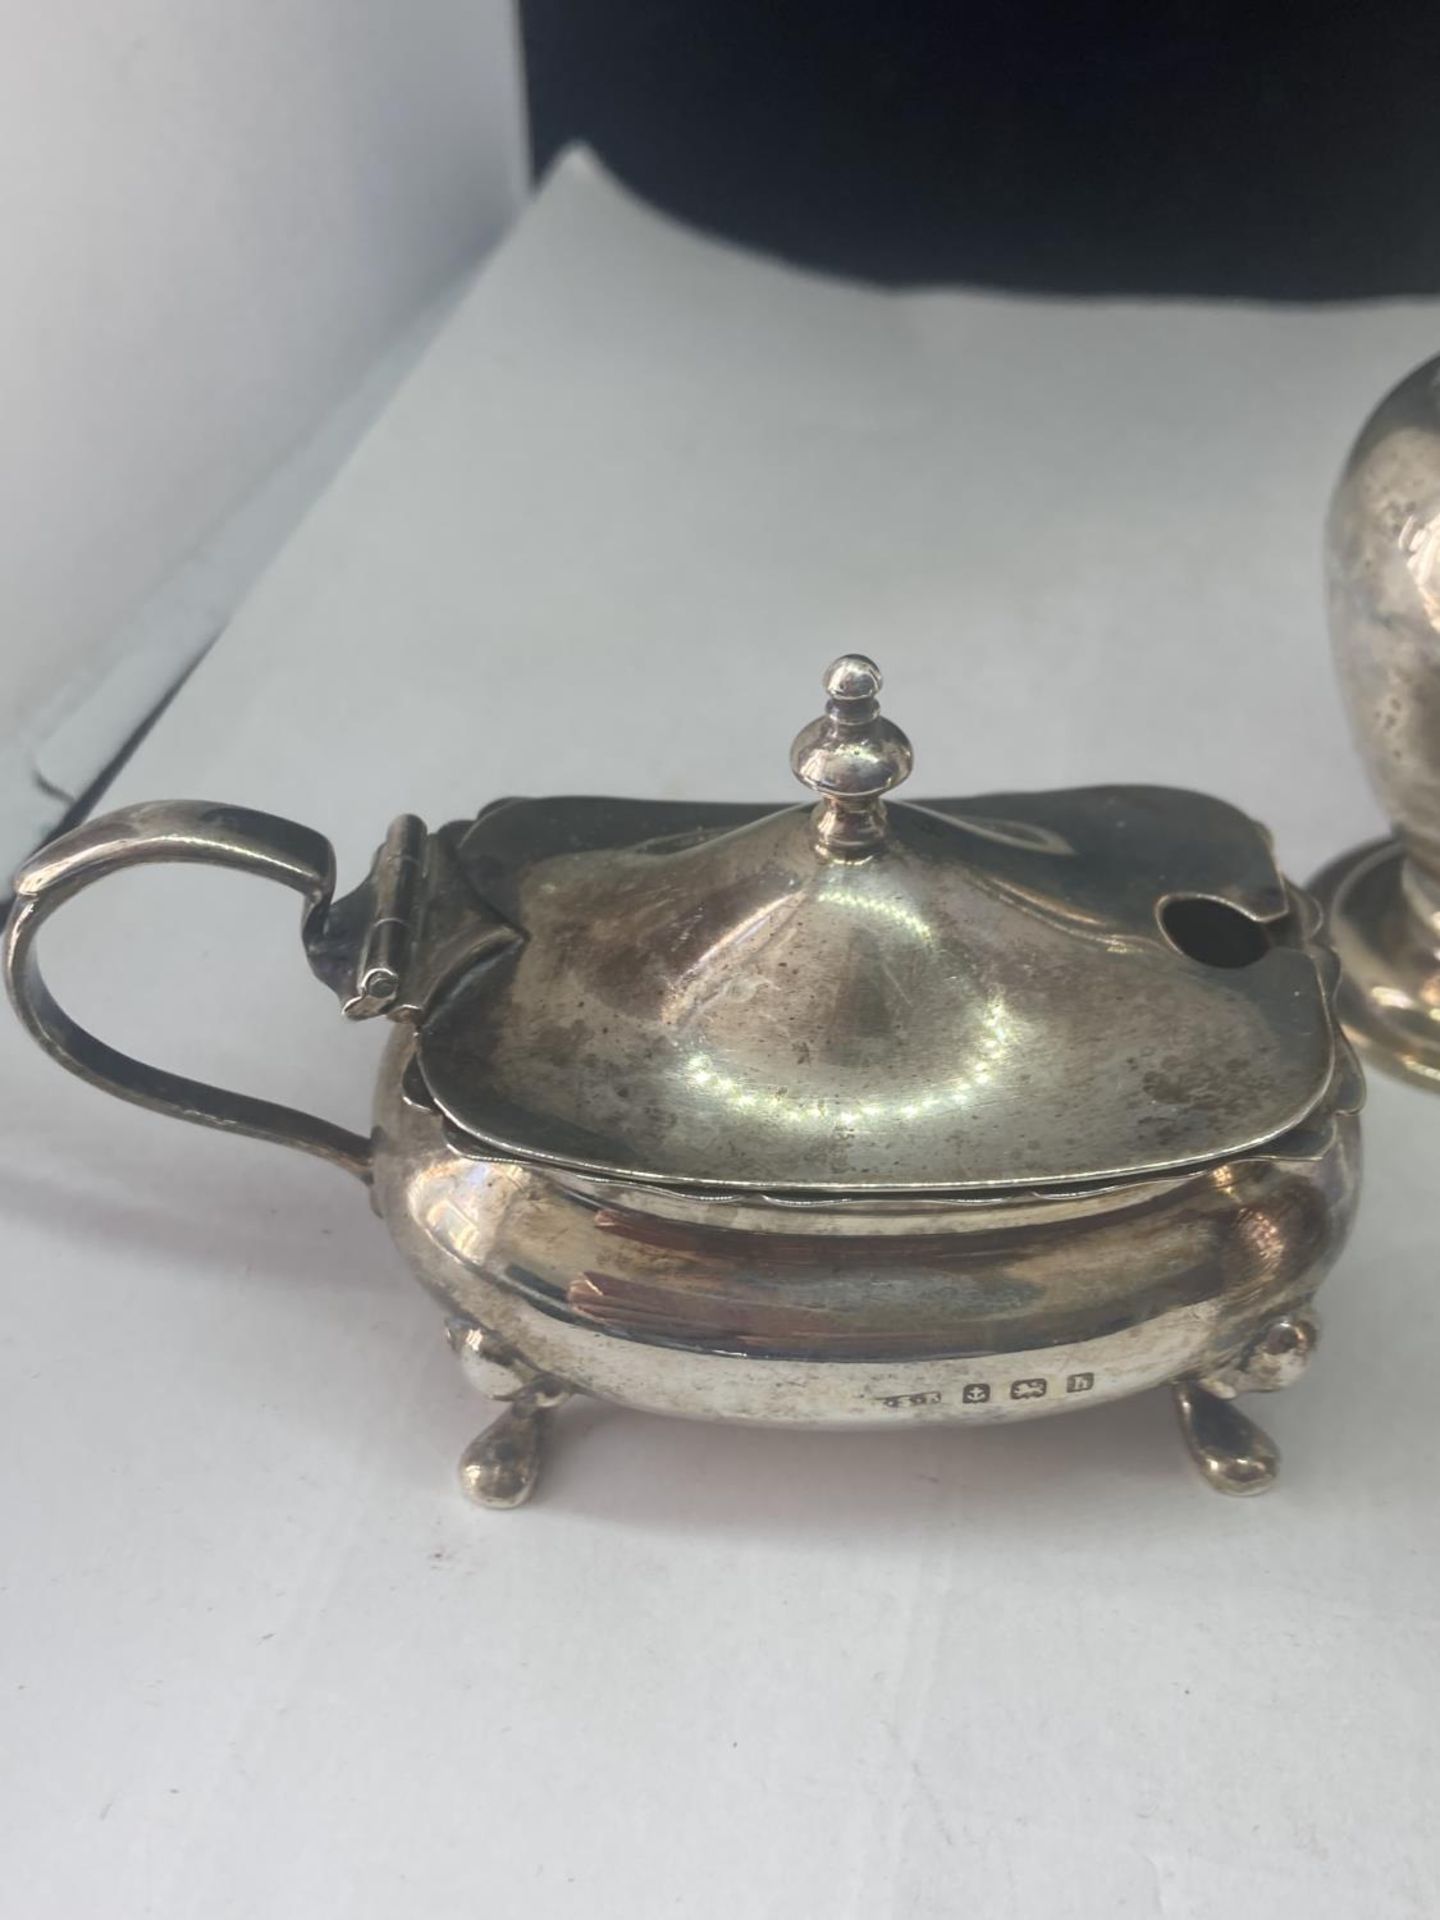 TWO HALLMARKED SILVER POTS (ONE WITH BLUE GLASS LINER) AND A HALLMARKED LONDON PEPPER POT GROSS - Image 4 of 8